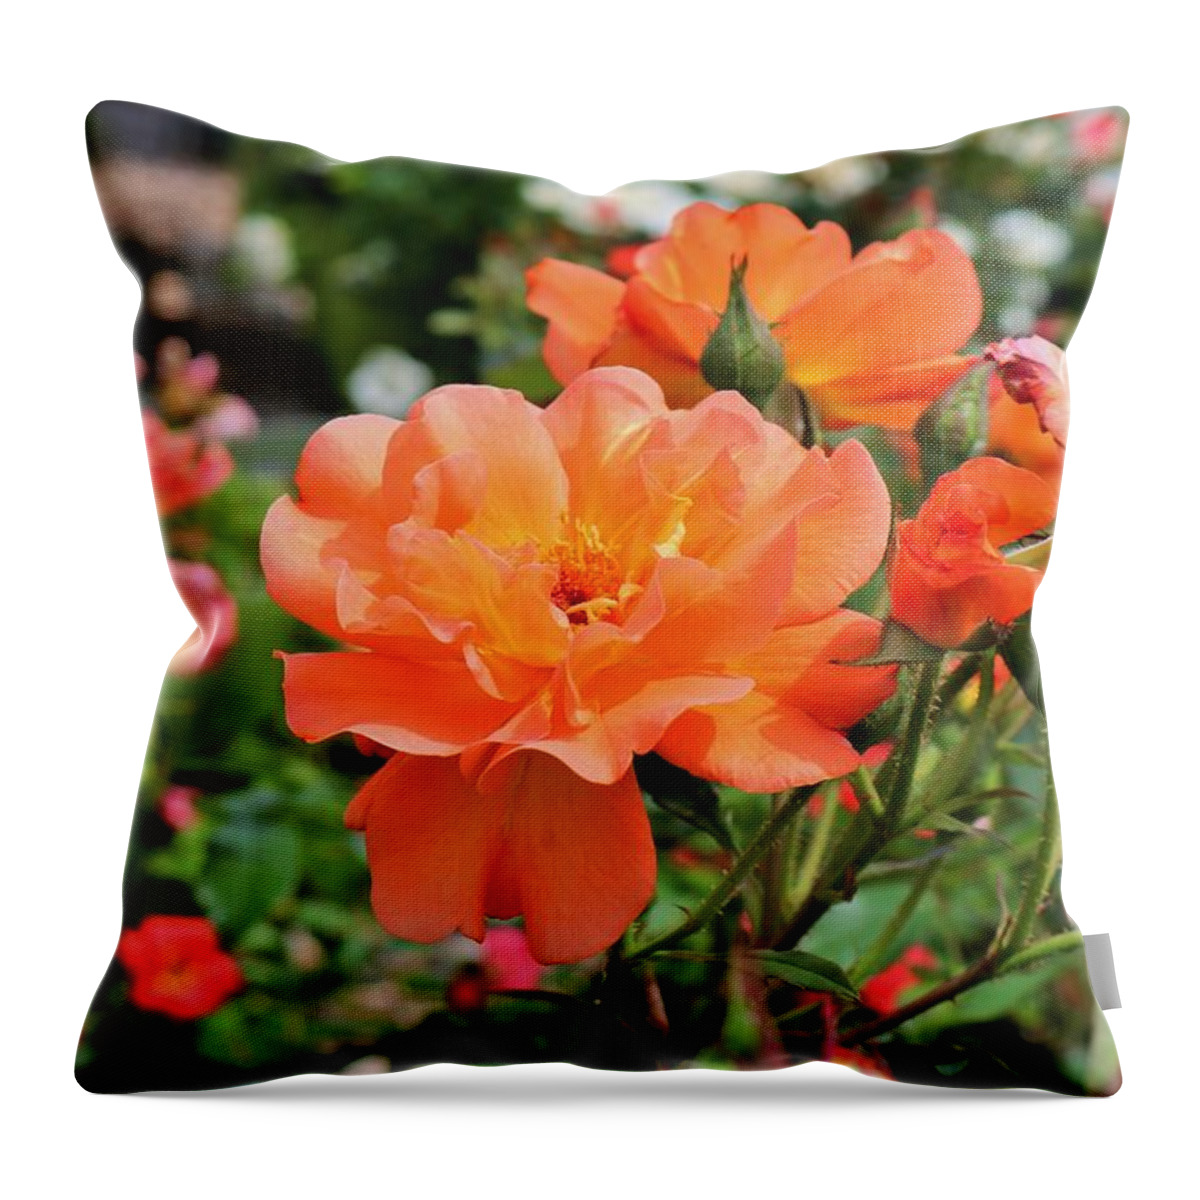 Orange Throw Pillow featuring the photograph And So It Shall Be by Michiale Schneider